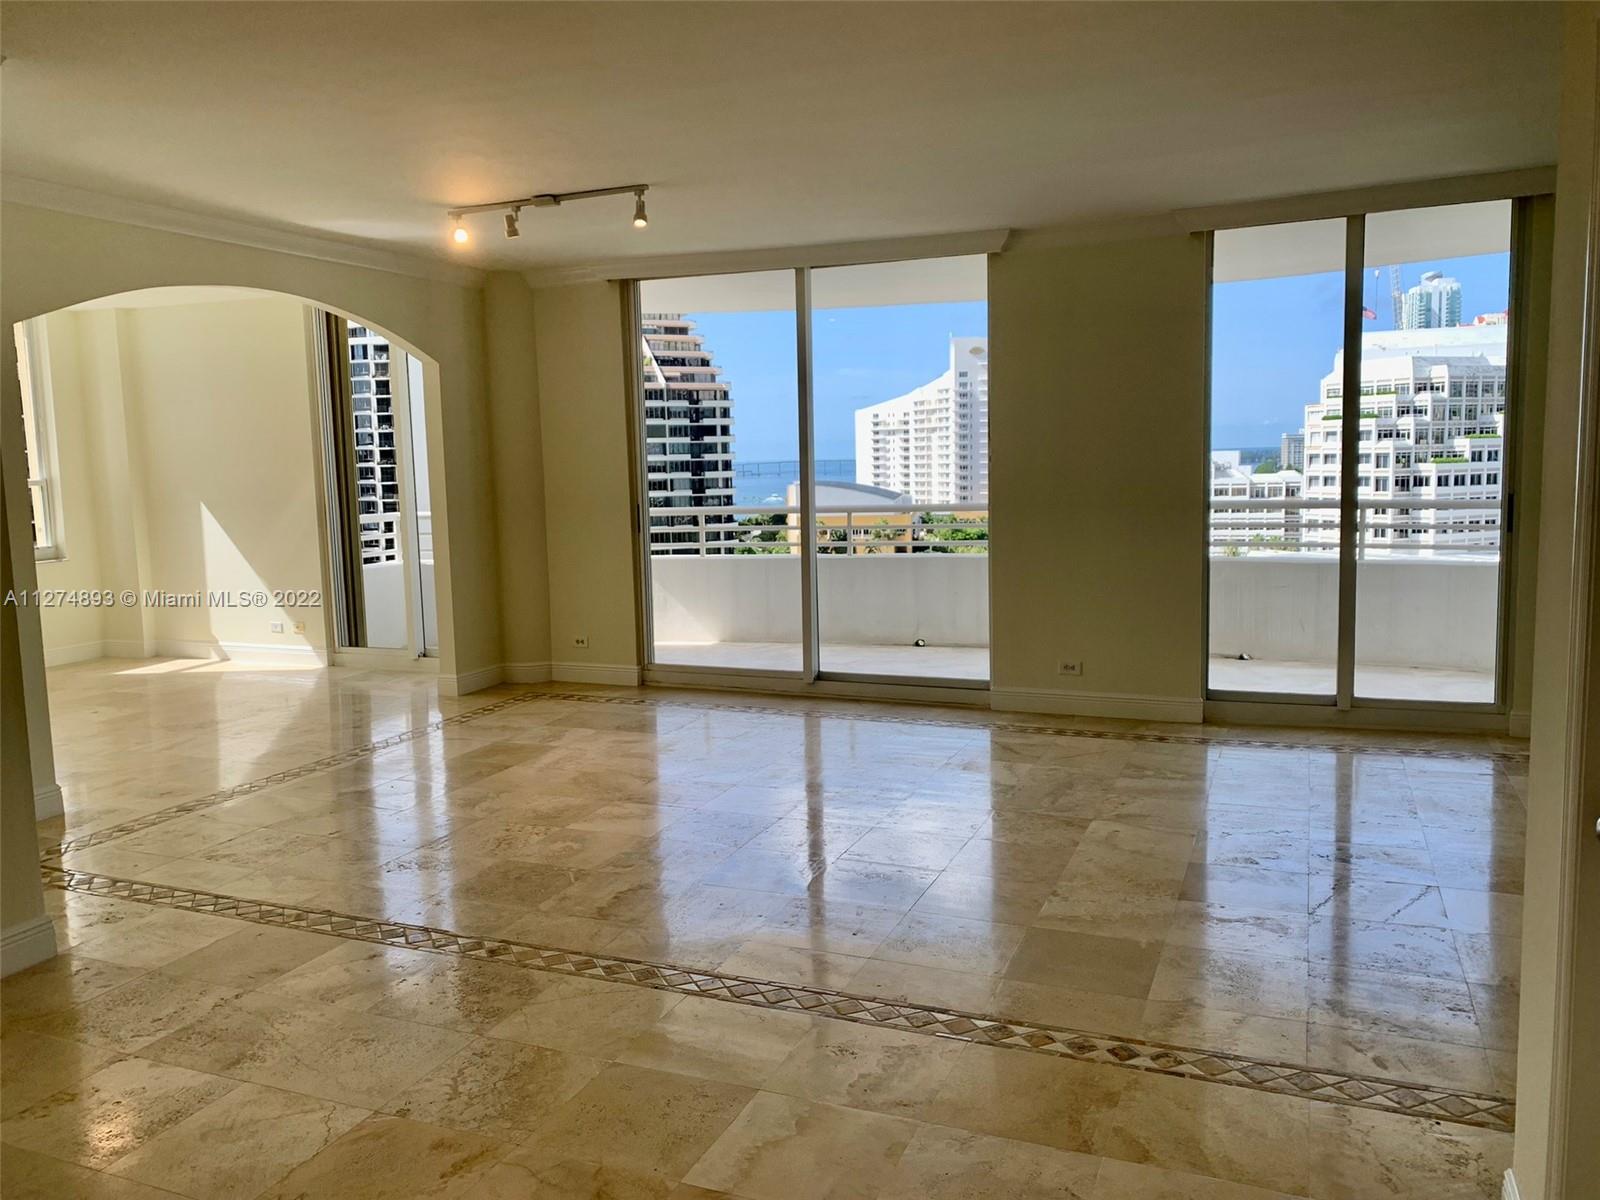 Incredible opportunity to own a large 3 Bedroom 3 Bath unit in Brickell Key, 2,050 Sq. Ft. of interior space.  This unit boast a formal dining room, large living area, two oversized balconies, eat in kitchen, truly feels like a home. 
Building amenities include, private guard gate, concierge, valet, pool, gym, racquetball/squash courts, business center, and much more.